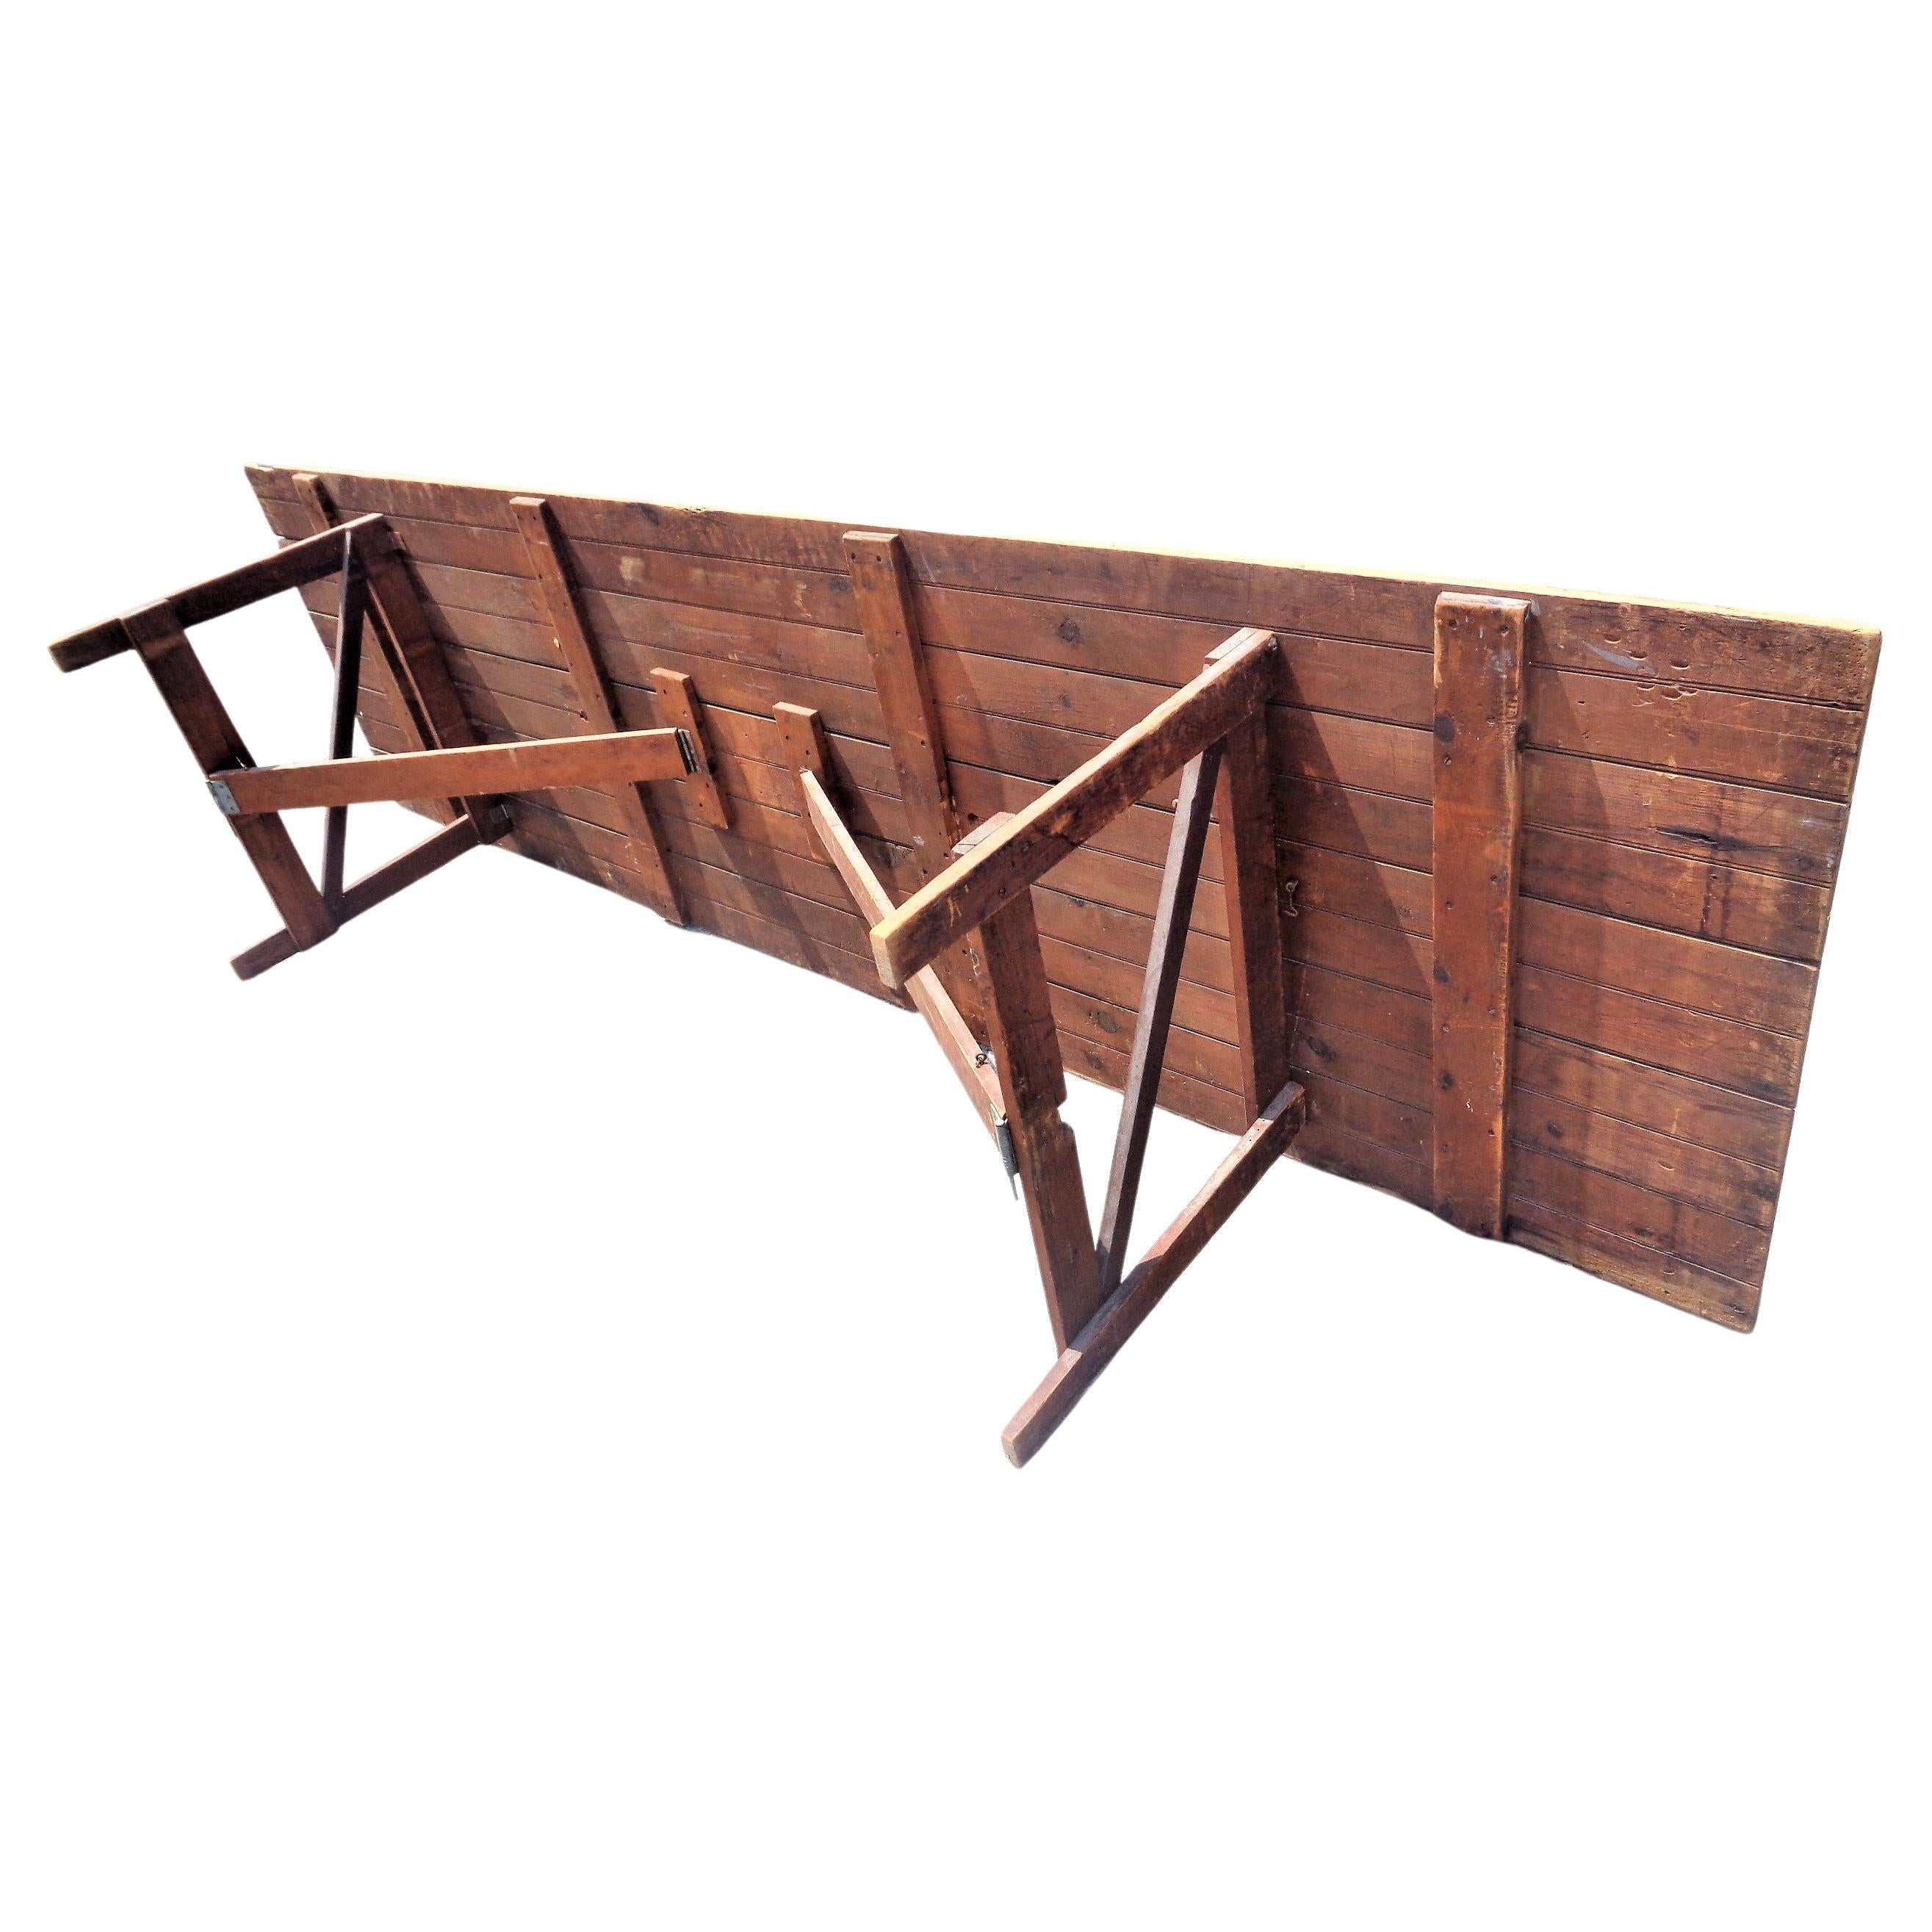 Metal Antique American Eleven Foot Long Folding Farm Table For Sale